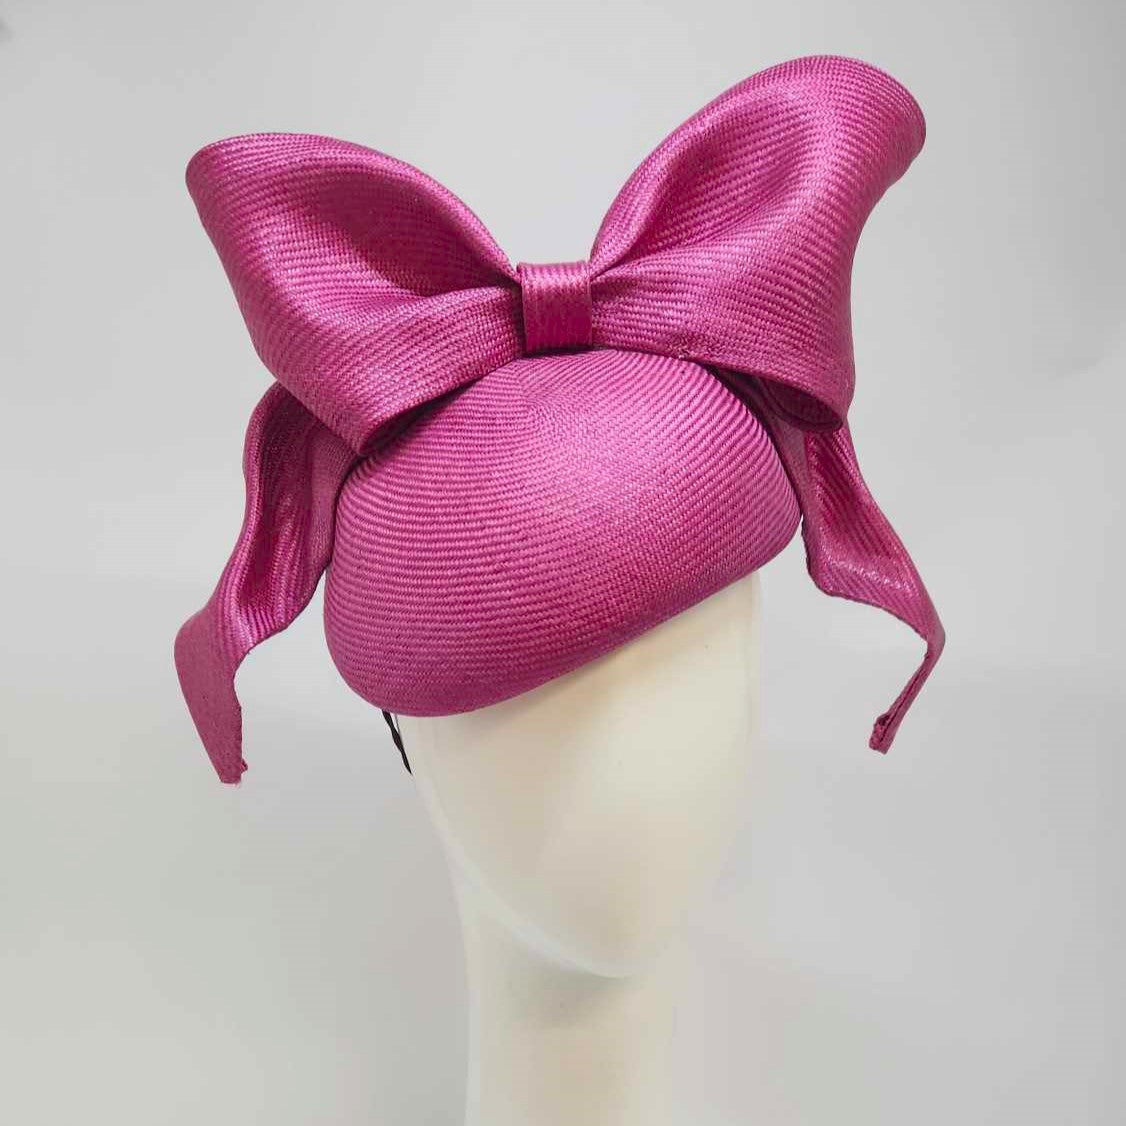 Ovens Straw Beret with Draped Bow in Magenta Pink